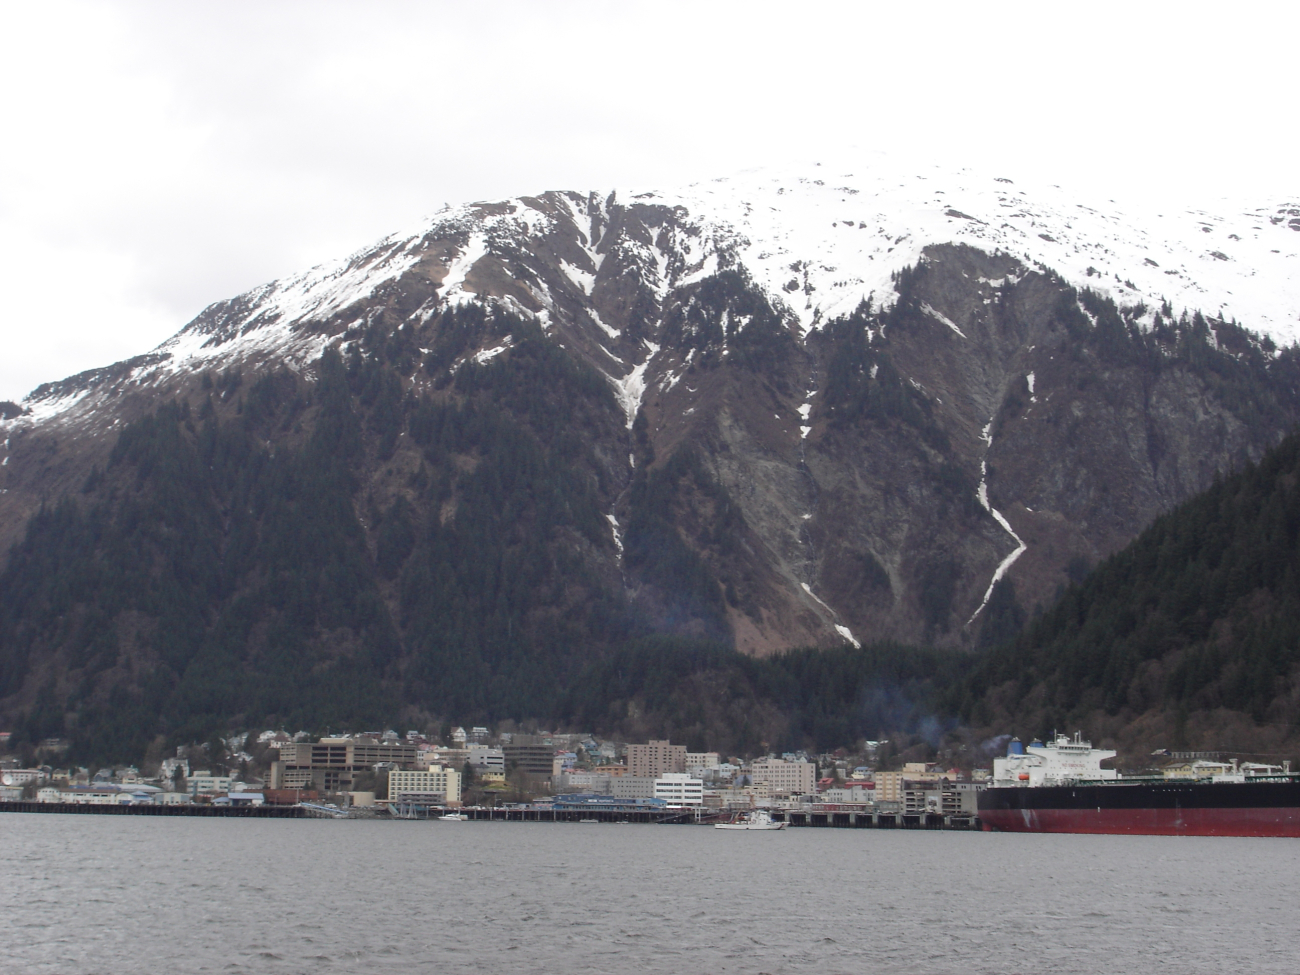 The Juneau waterfront